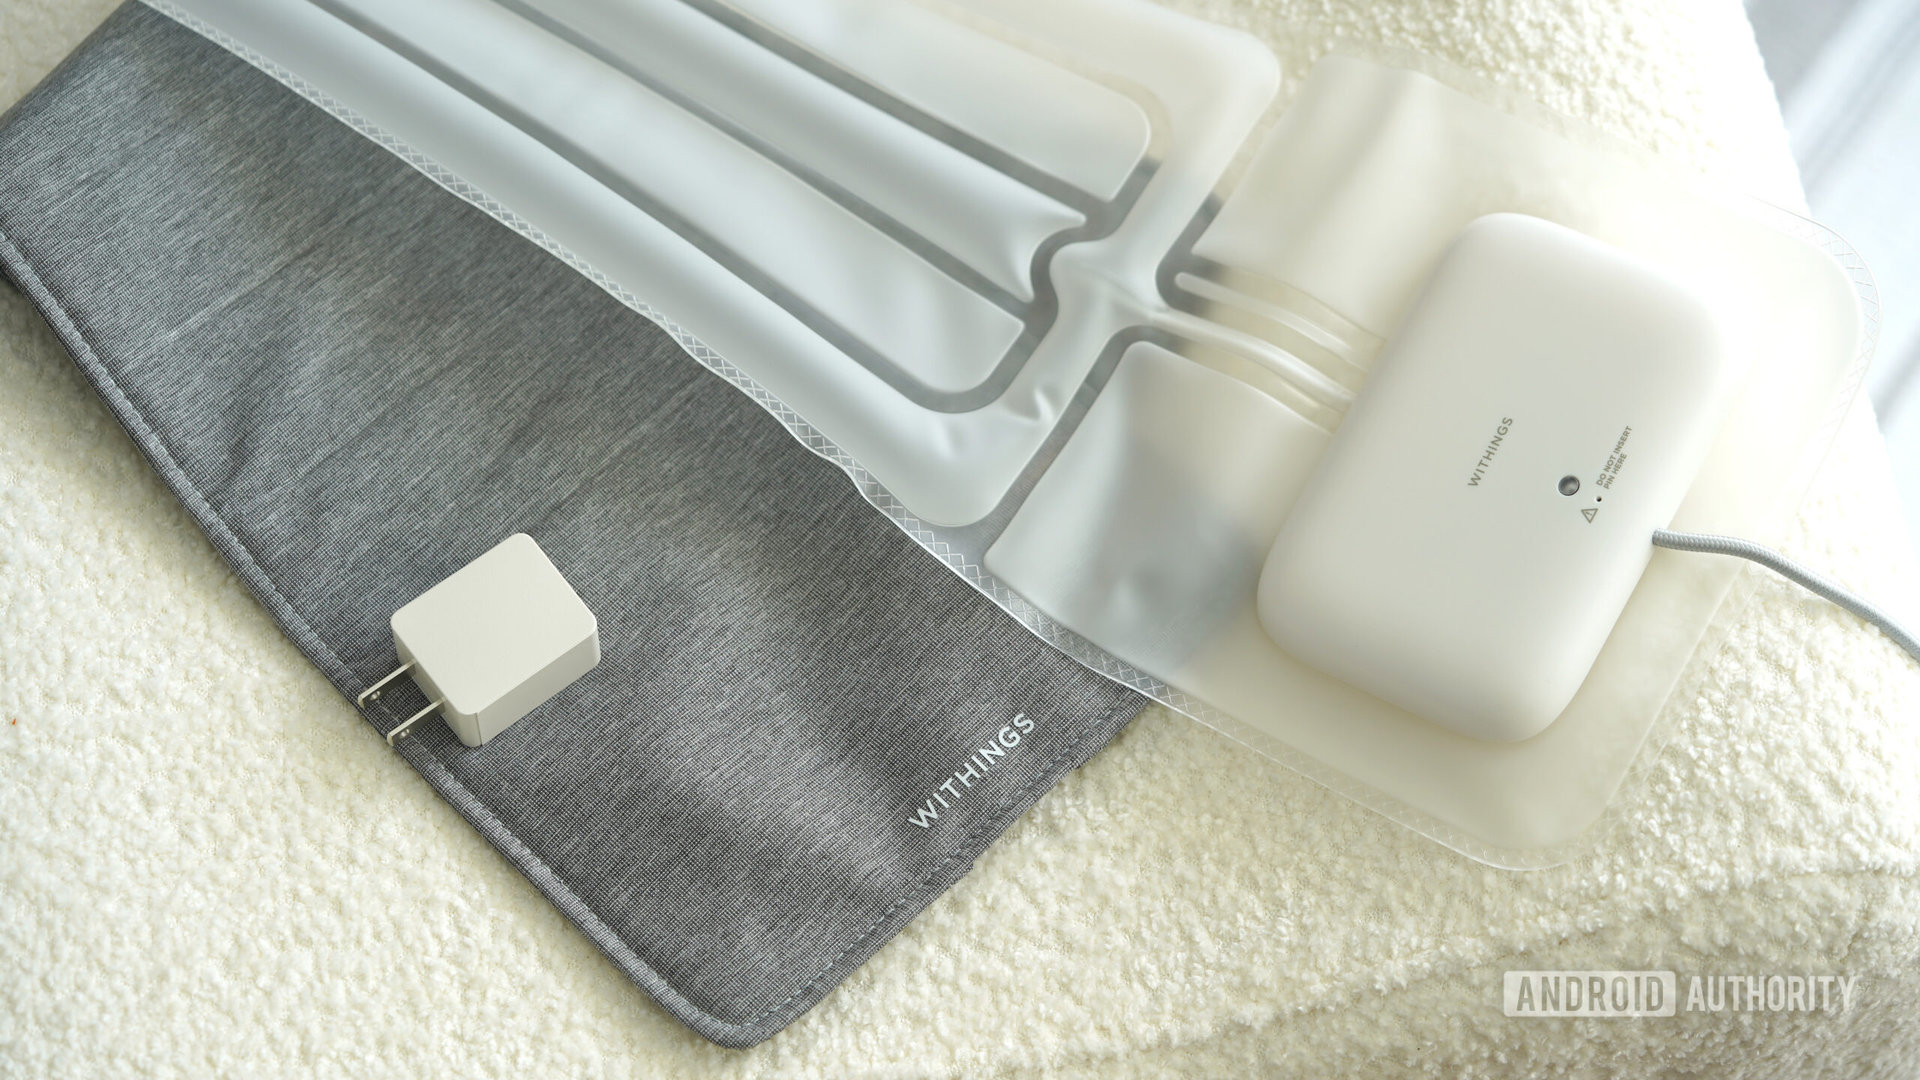 A Withing Sleep Tracking Mat rests alongside its fabric cover and power adapter.